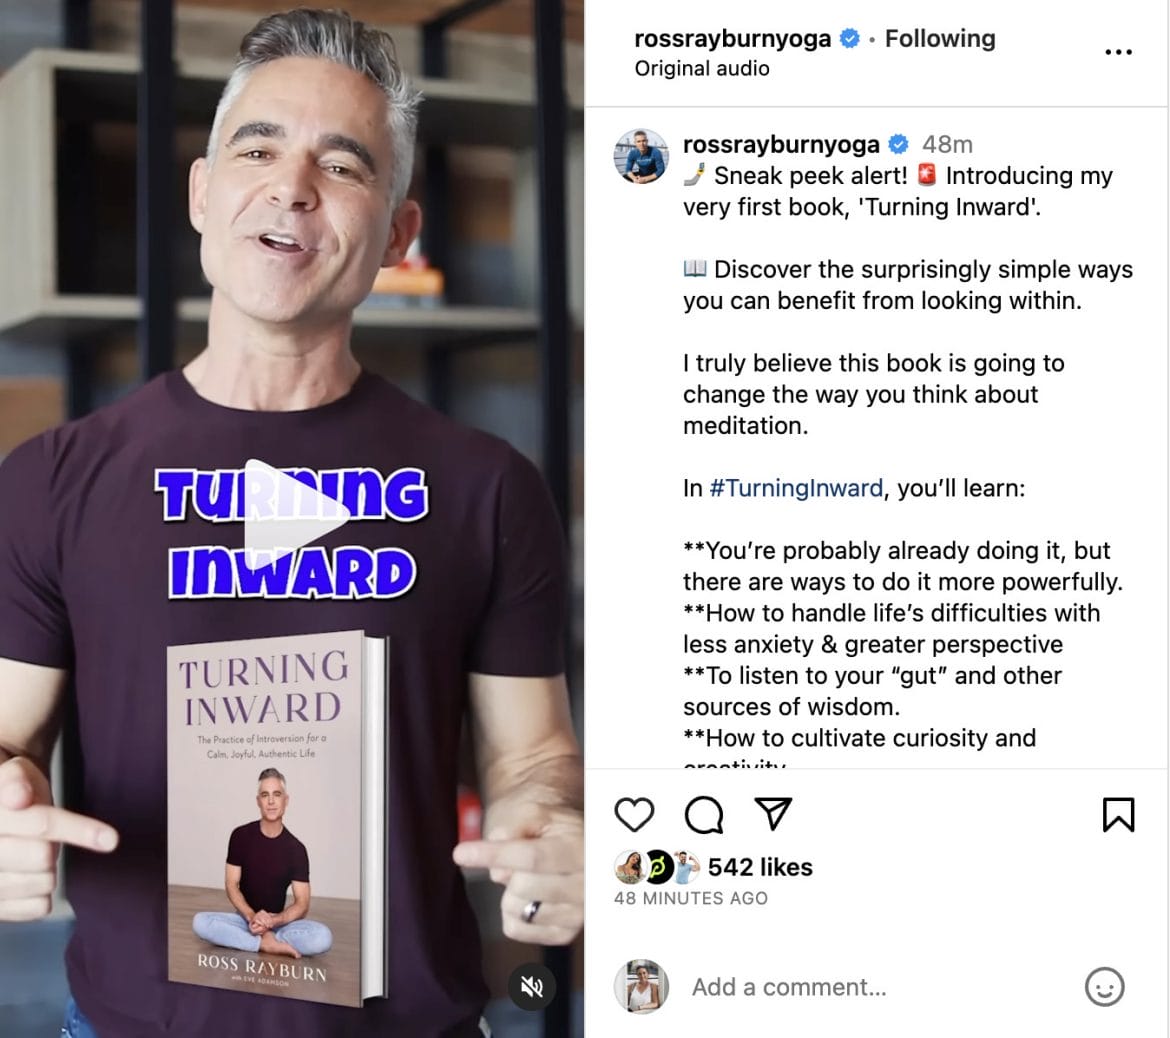 Ross Rayburn's Instagram post announcing new book.